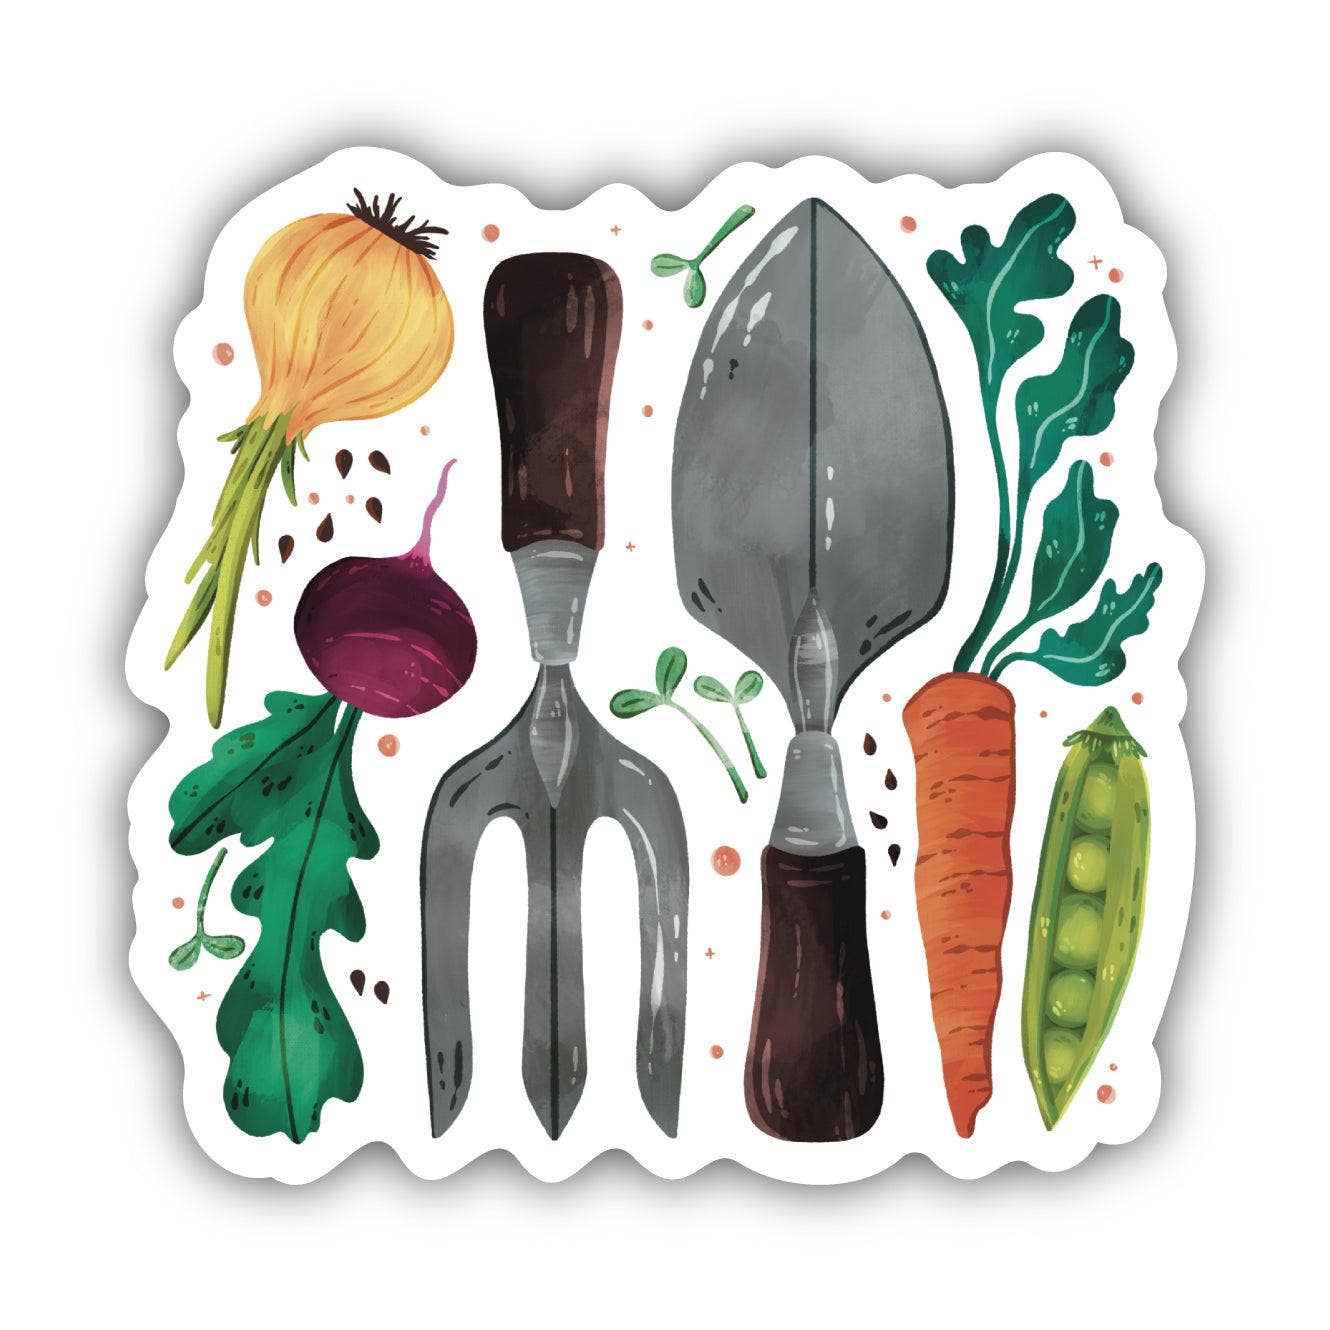 Garden Tools and Vegetables Sticker